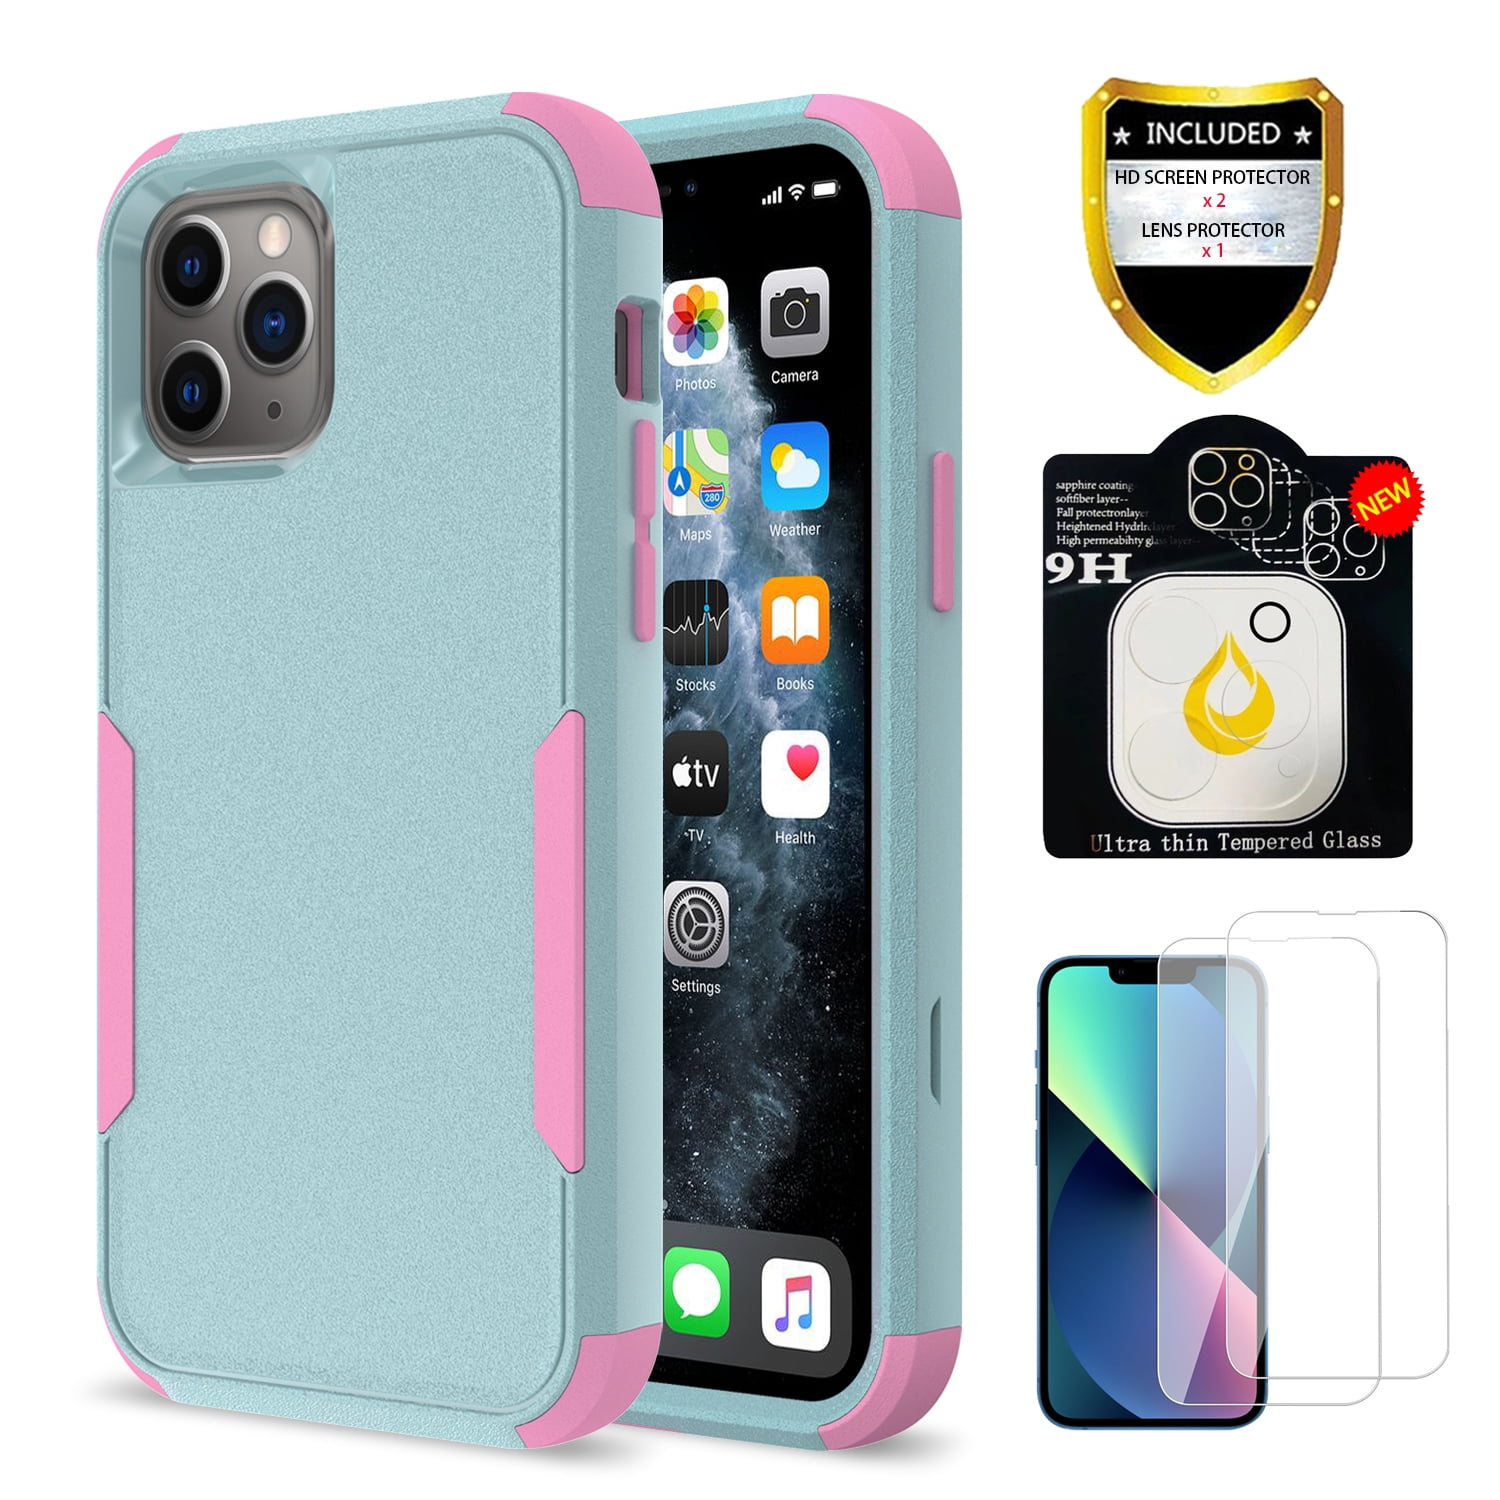 Apple iPhone 12 Pro Max Case + Camera Lens Protector , Rugged Rubber  Durable 3 in 1 Cover , Phone Case for Girl Men Women Cute (Pink+Teal) 